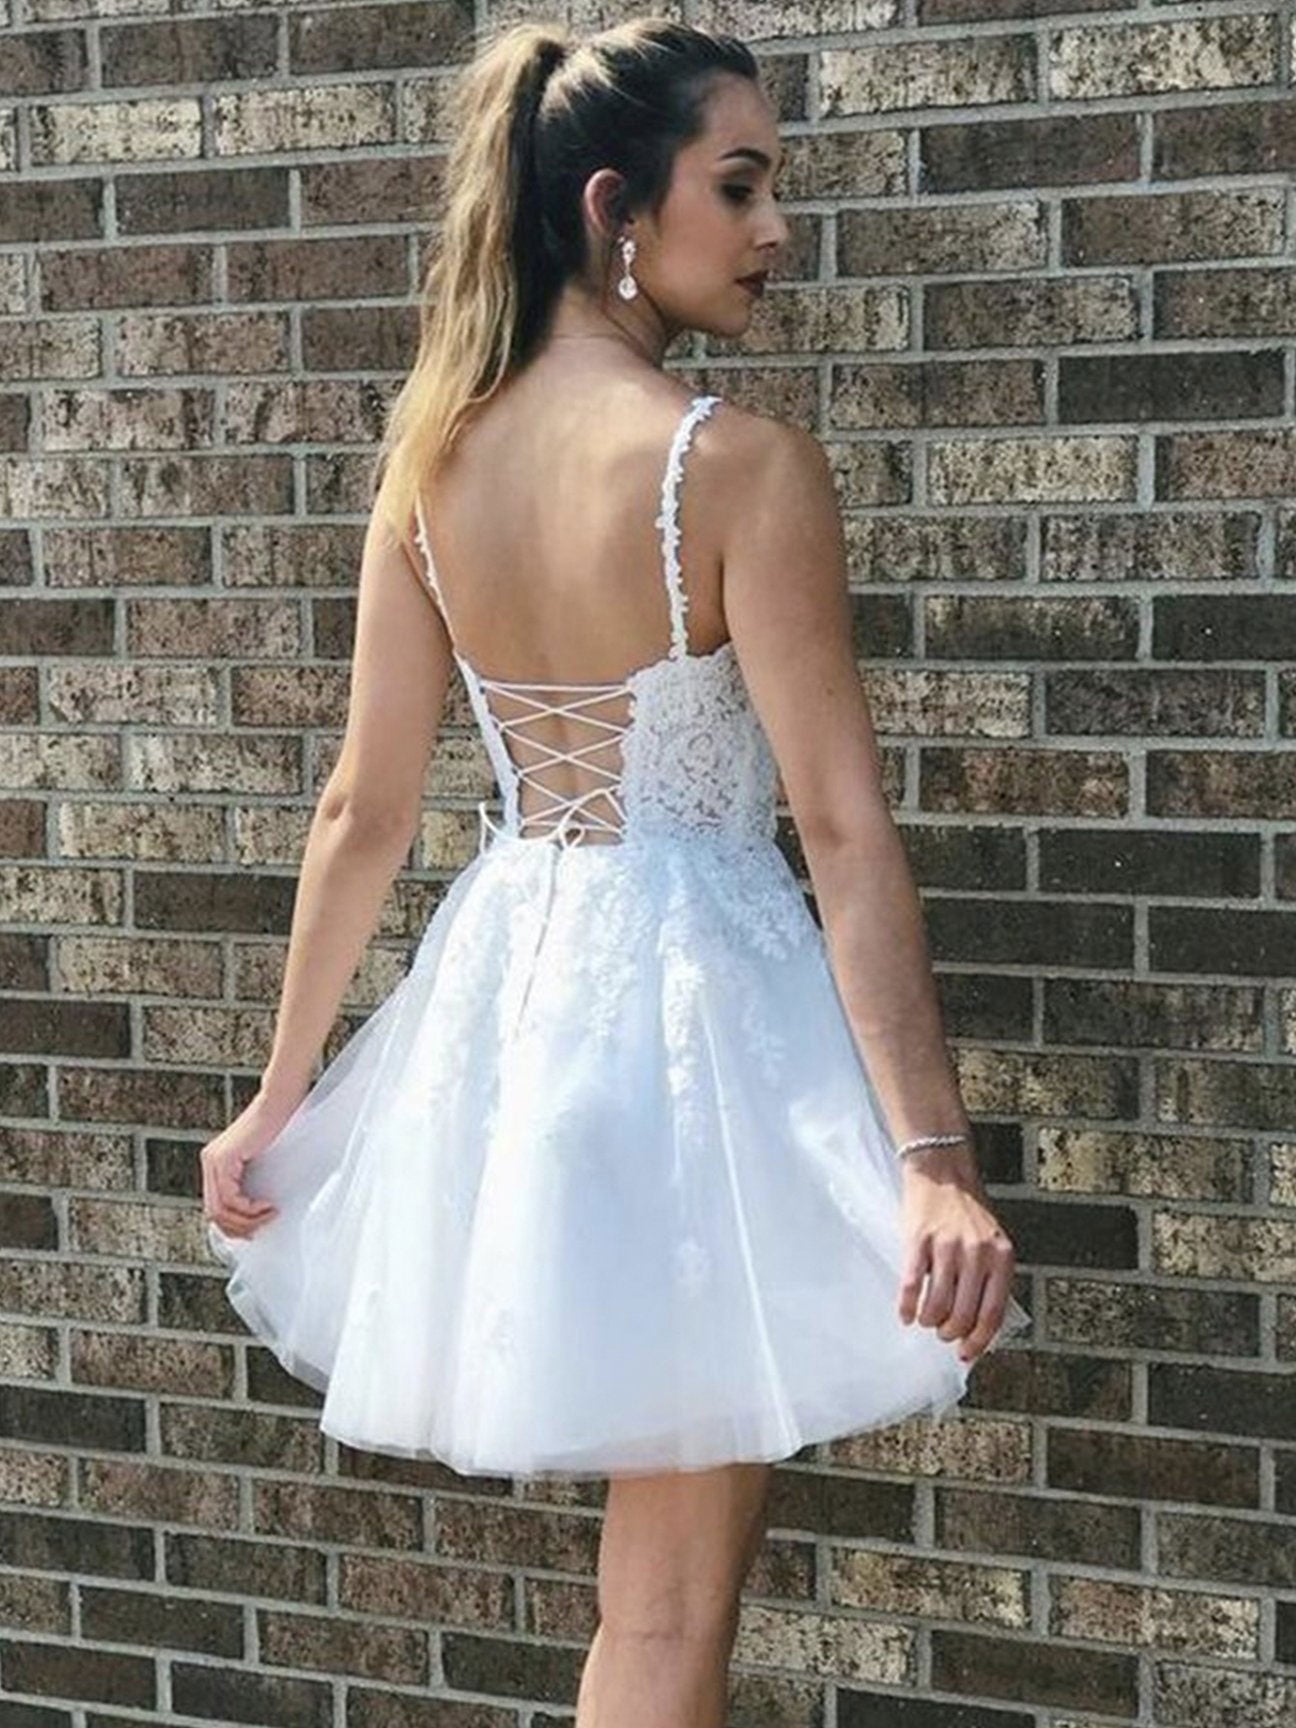 White lace v neck tulle short prom dress, white tulle lace homecoming dress